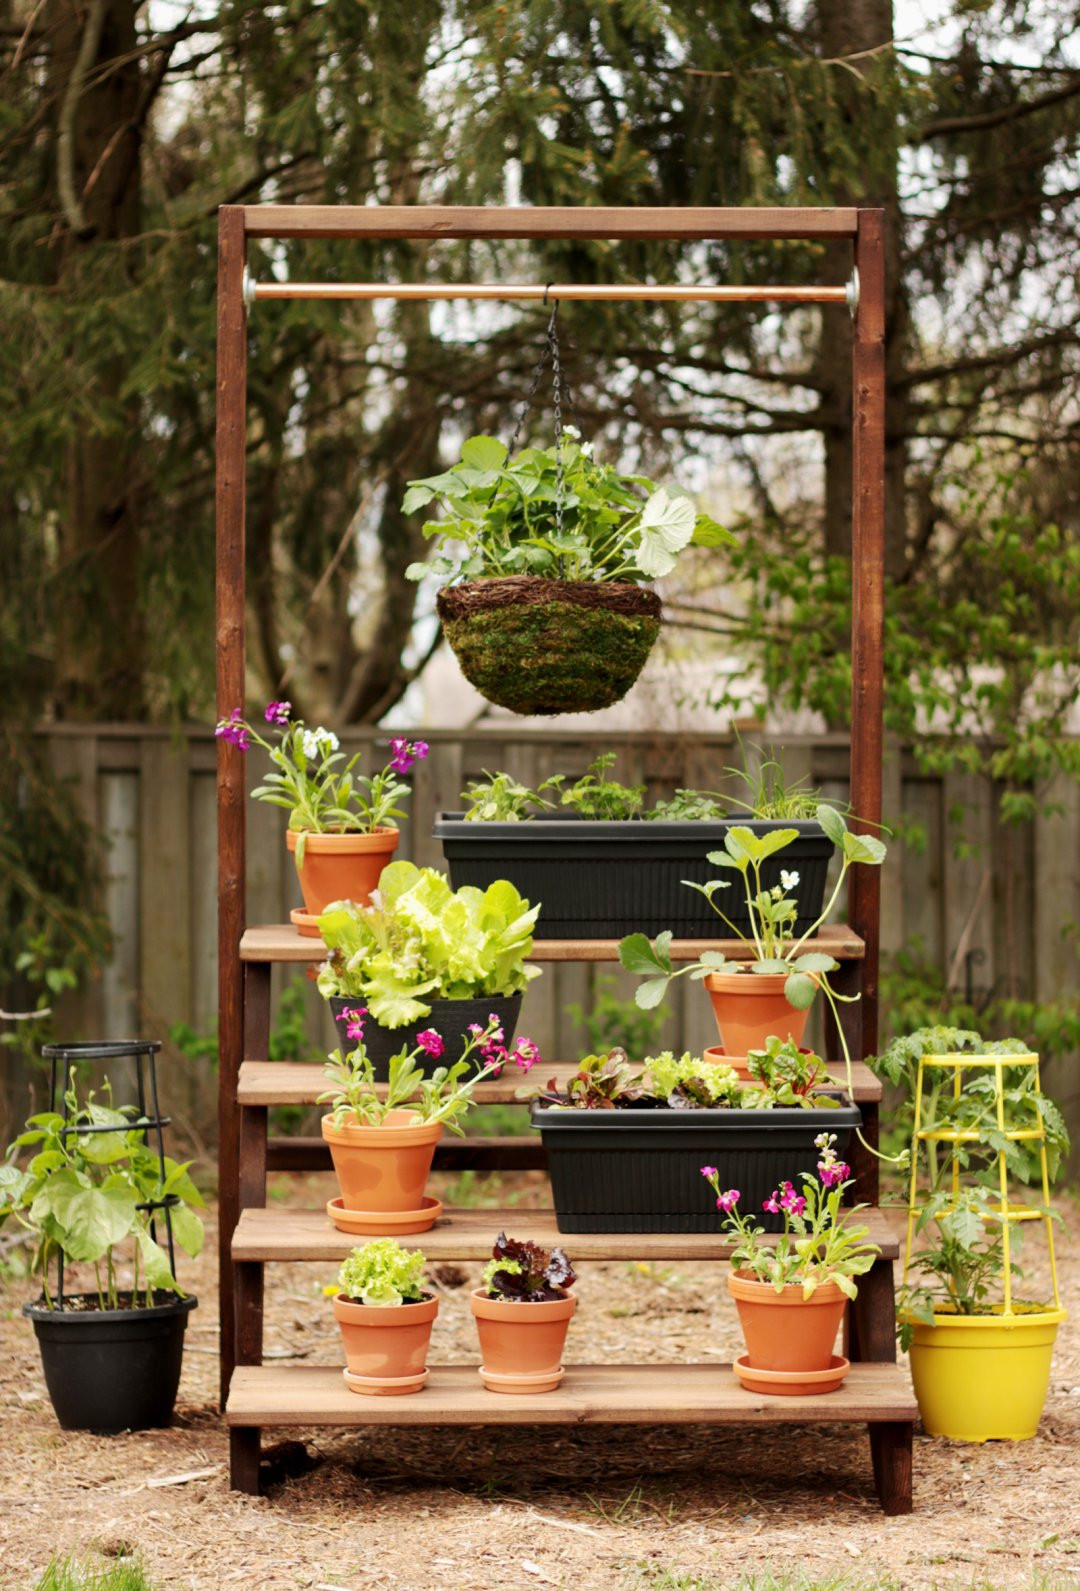 DIY Outdoor Plant Stand
 7 Steps To A DIY Staircase Garden For Your Patio